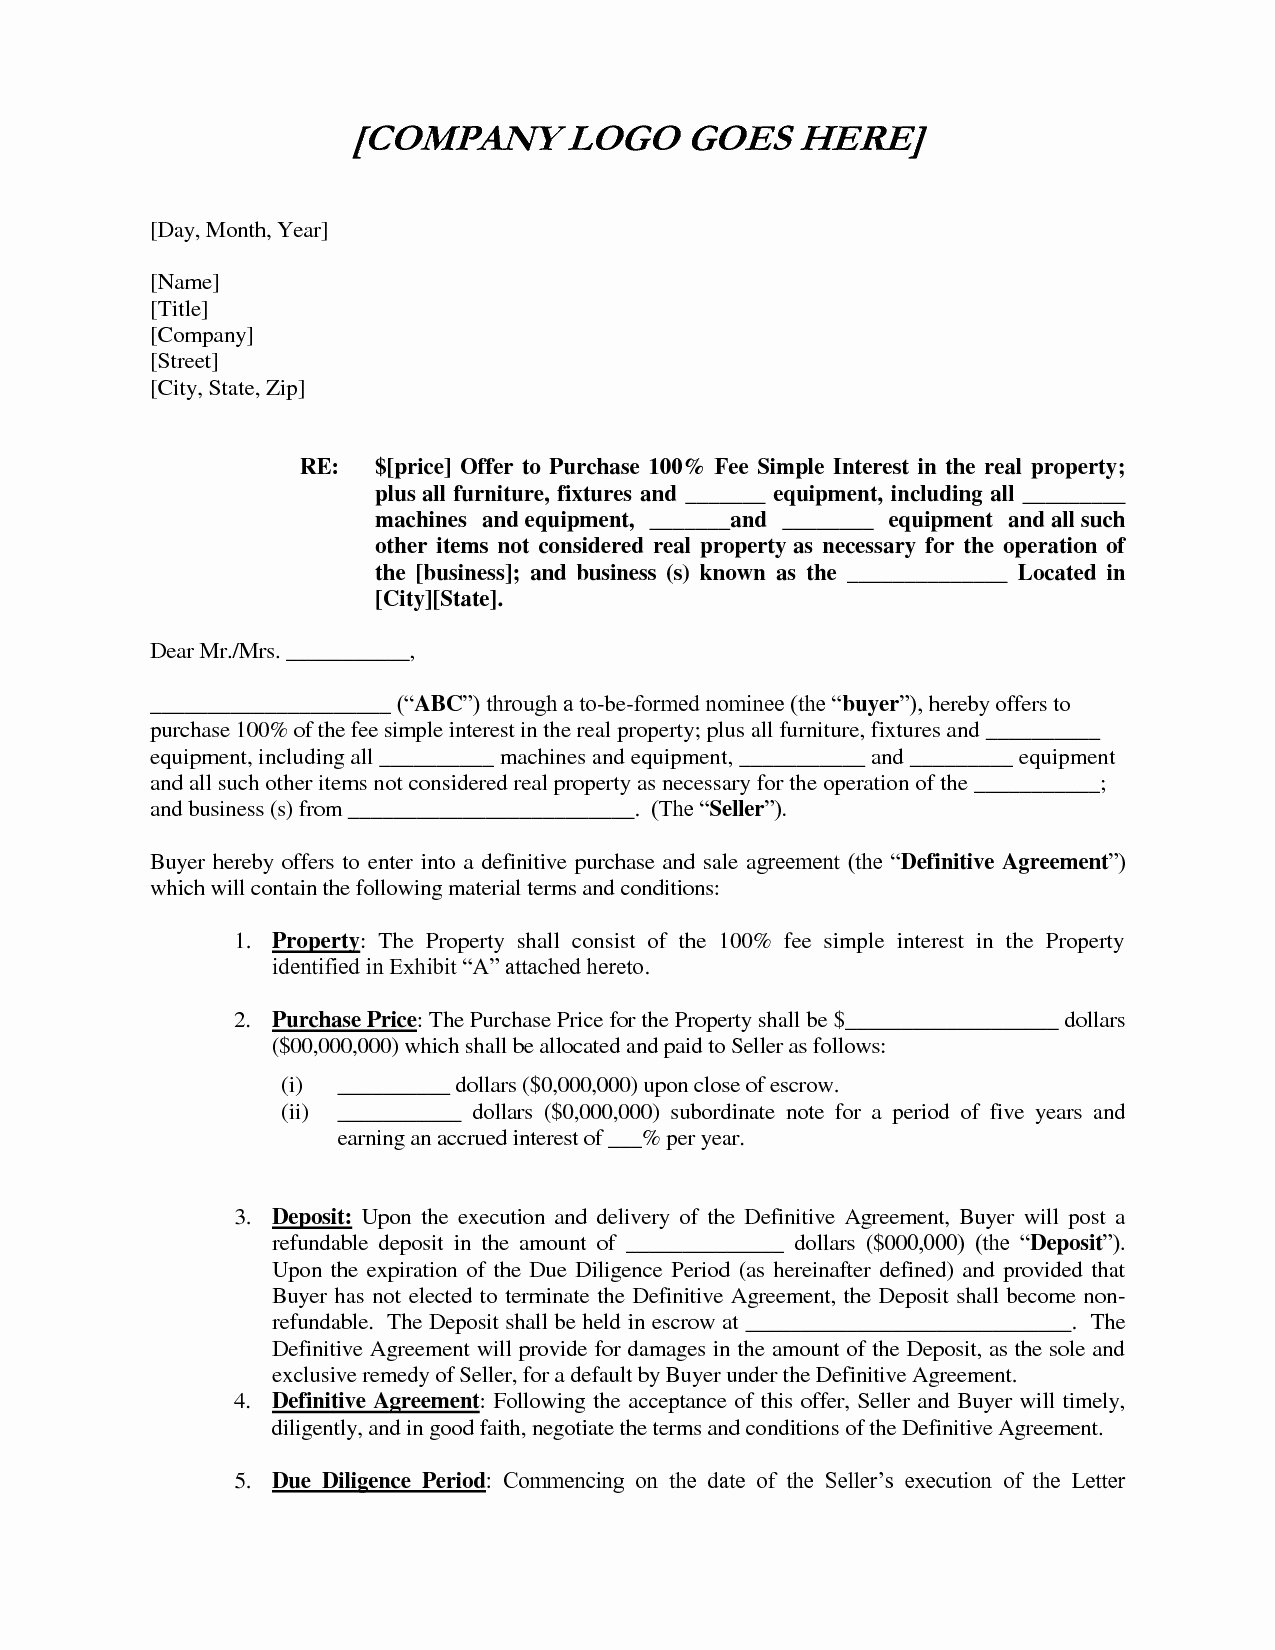 Letter Of Intent to Purchase Real Estate Template Luxury Letter Intent to Purchase Equipment Template Collection